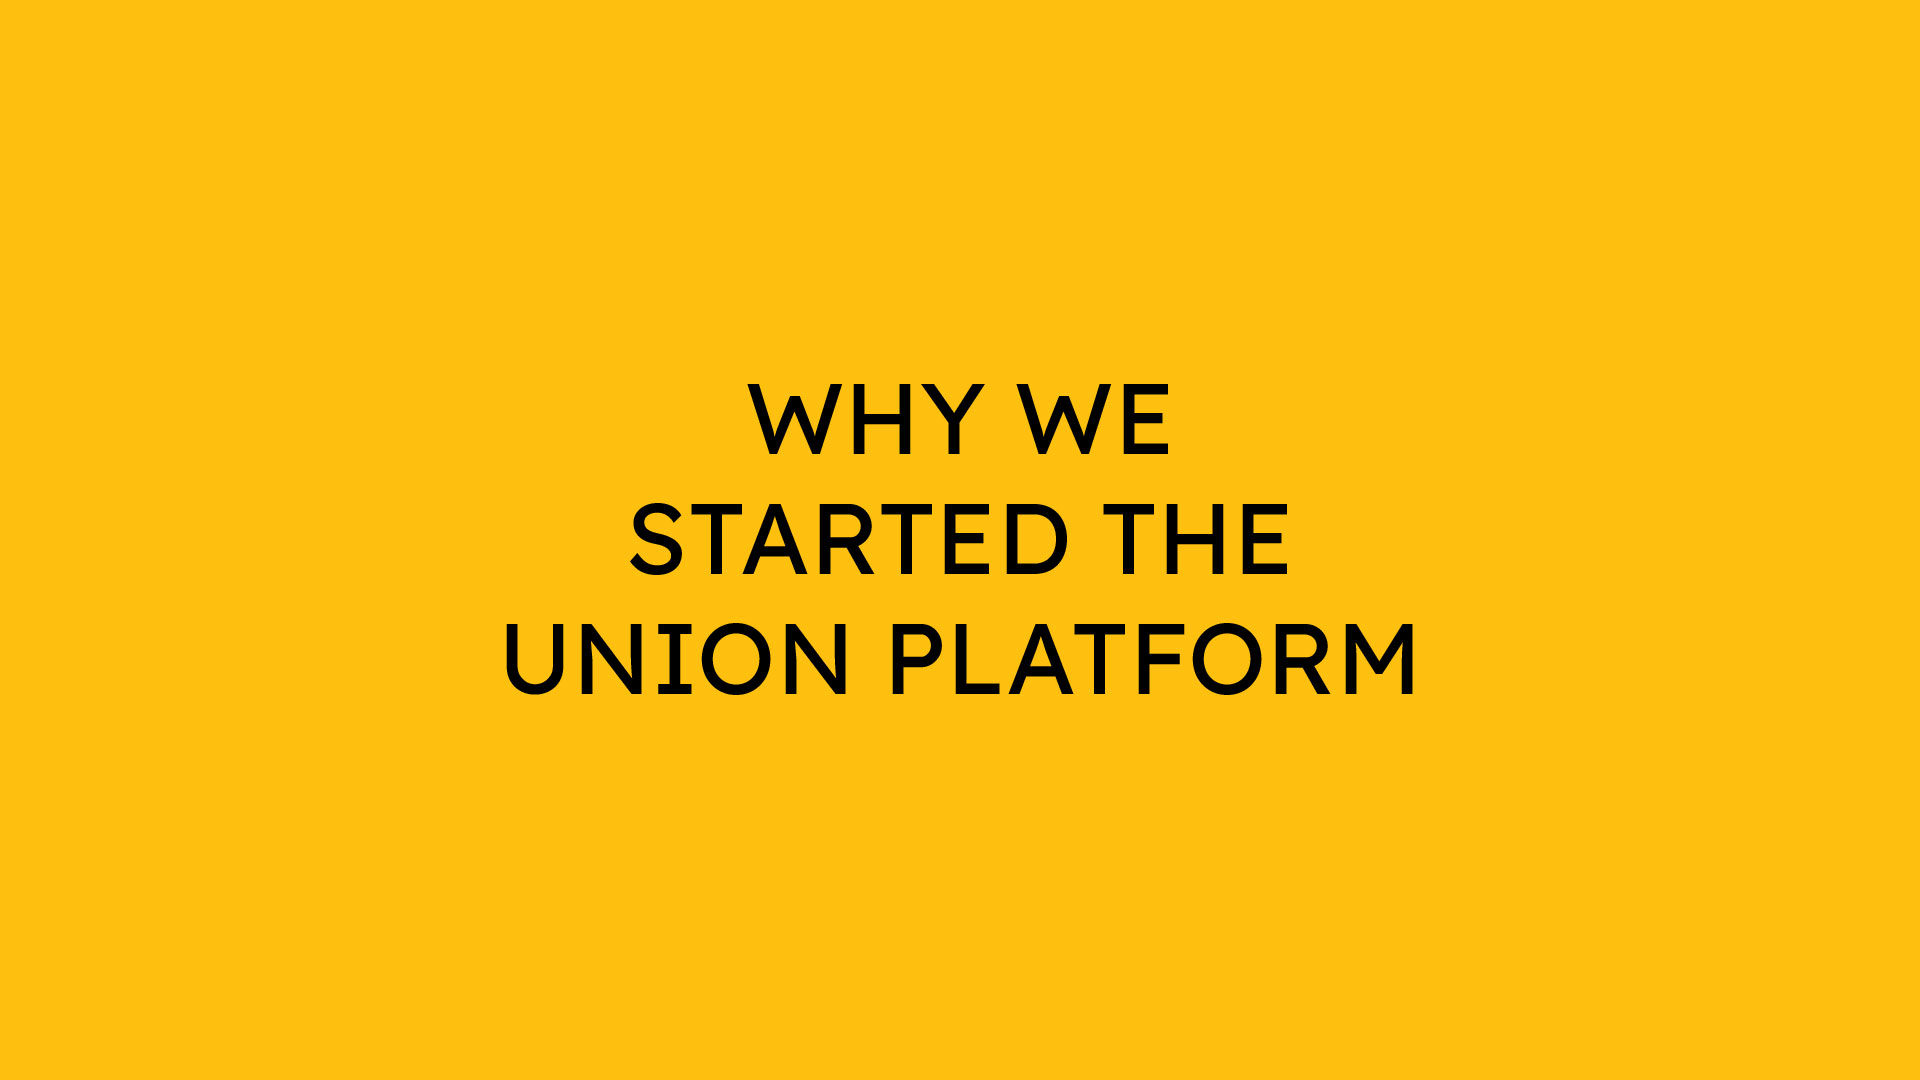 Why We Started the Union Platform